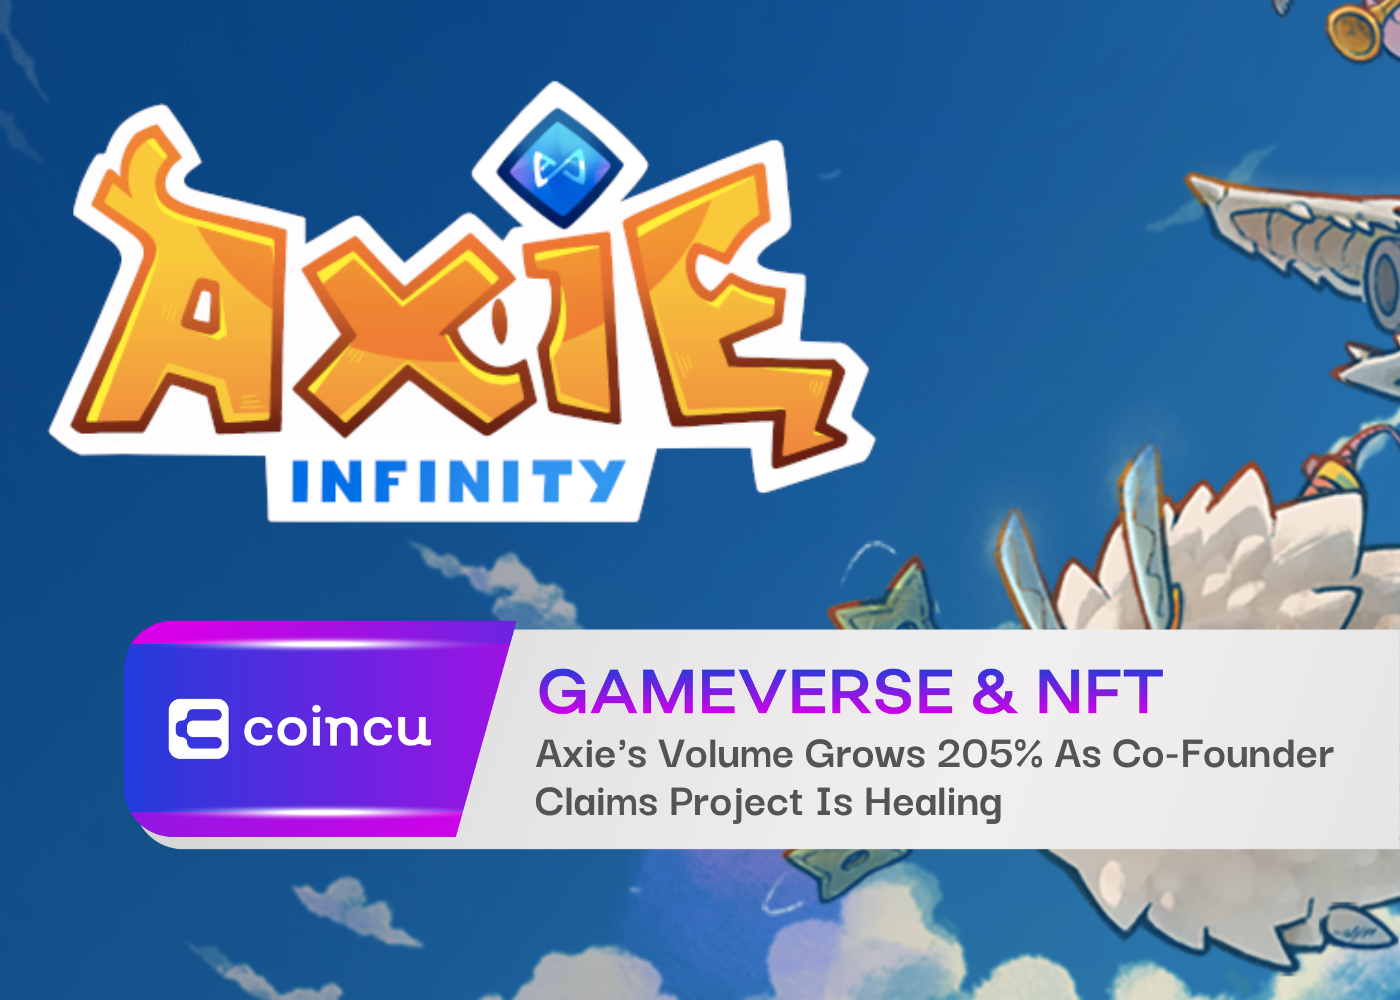 Axie's Volume Grows 205% As Co-Founder Claims Project Is Healing